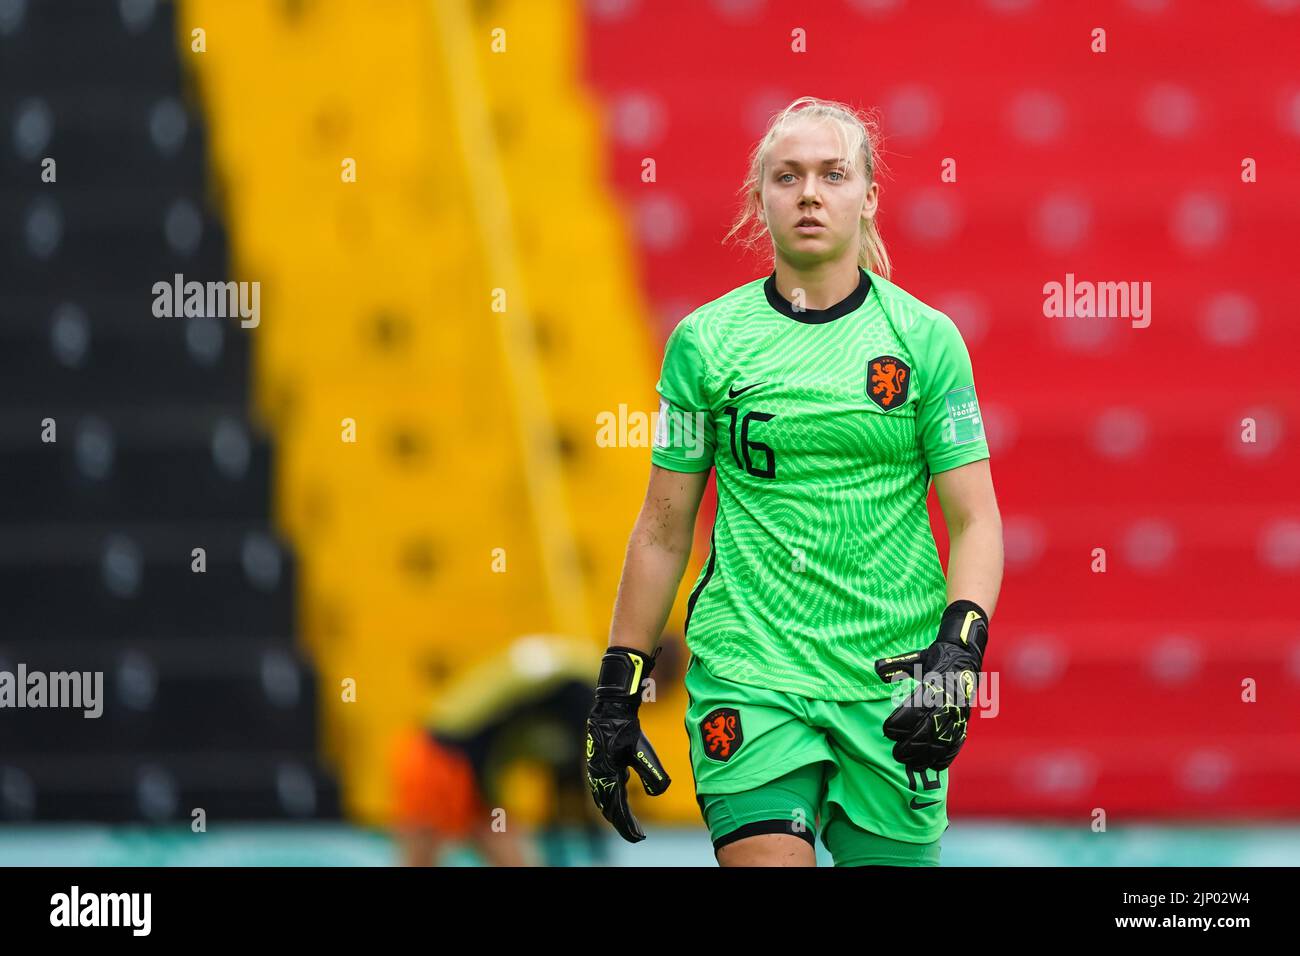 Alajuela, Costa Rica. 11th Aug, 2022. Alajuela, Costa Rica, August 11th 2022: Portrait (headshot/close up) of goalkeeper Lisan Alkemade (16 Netherlands) during the FIFA U20 Womens World Cup Costa Rica 2022 football match between Japan and Netherlands at Morera Soto in Alajuela, Costa Rica. (Daniela Porcelli/SPP) Credit: SPP Sport Press Photo. /Alamy Live News Stock Photo